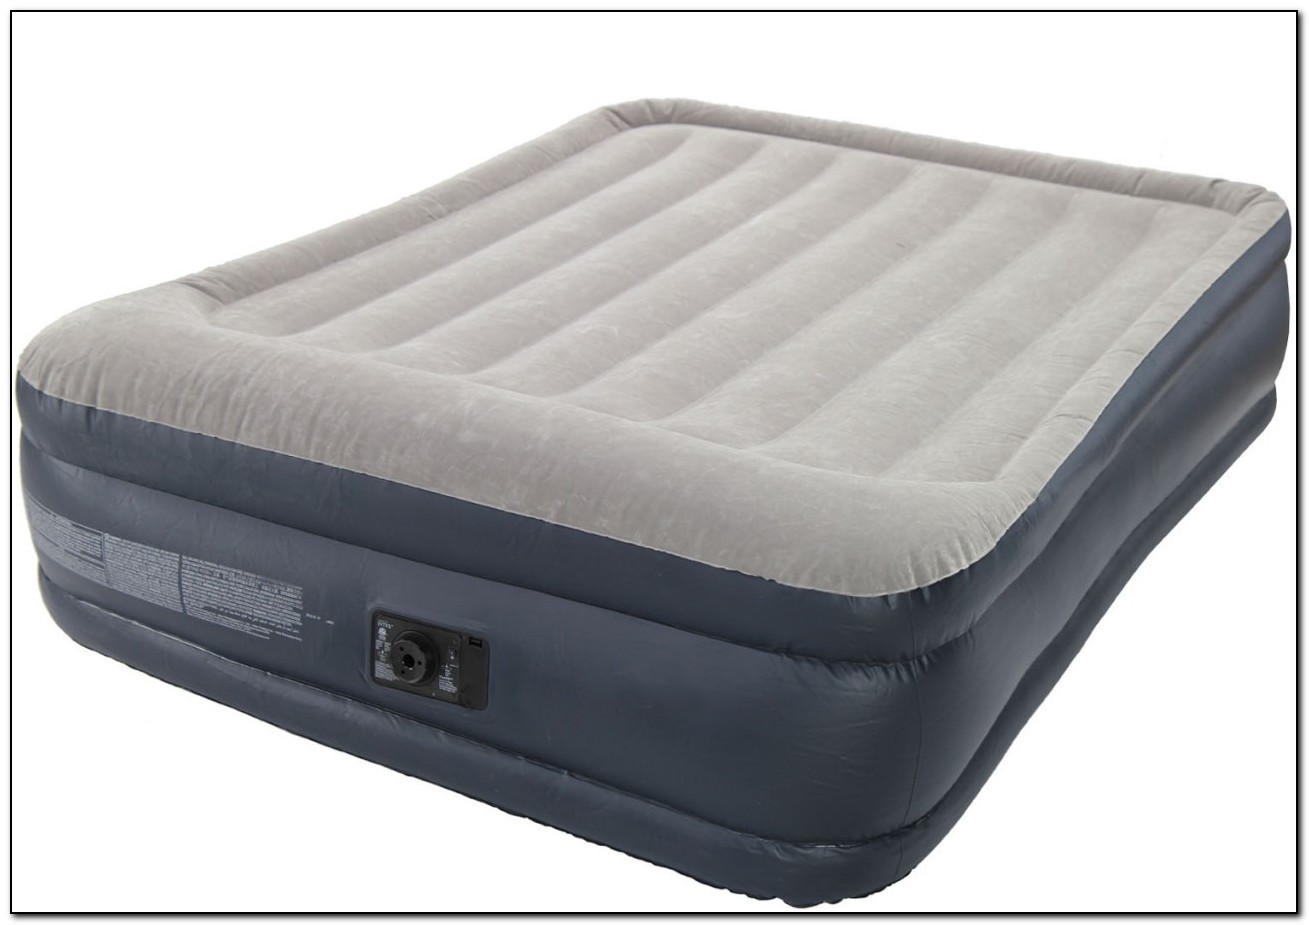 Best Air Bed For Heavy People